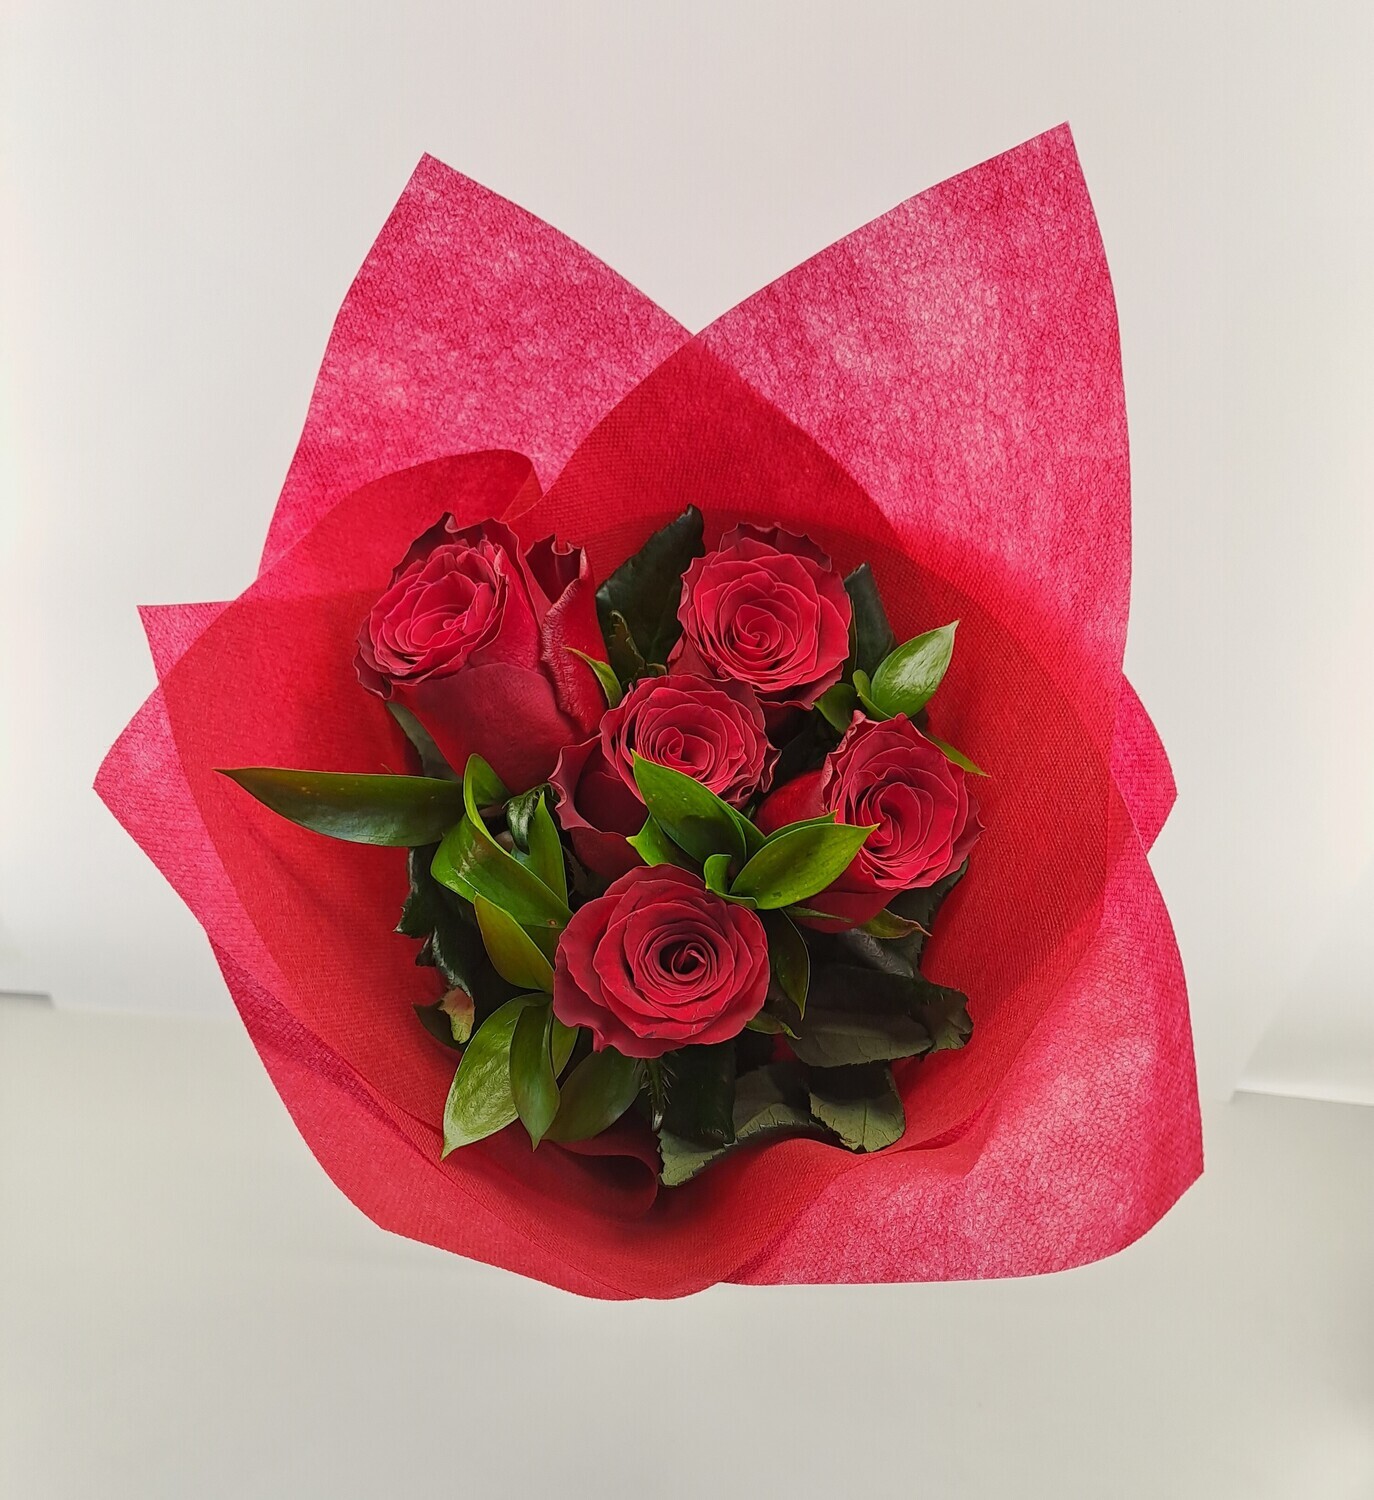 Bouquet with red roses!!!